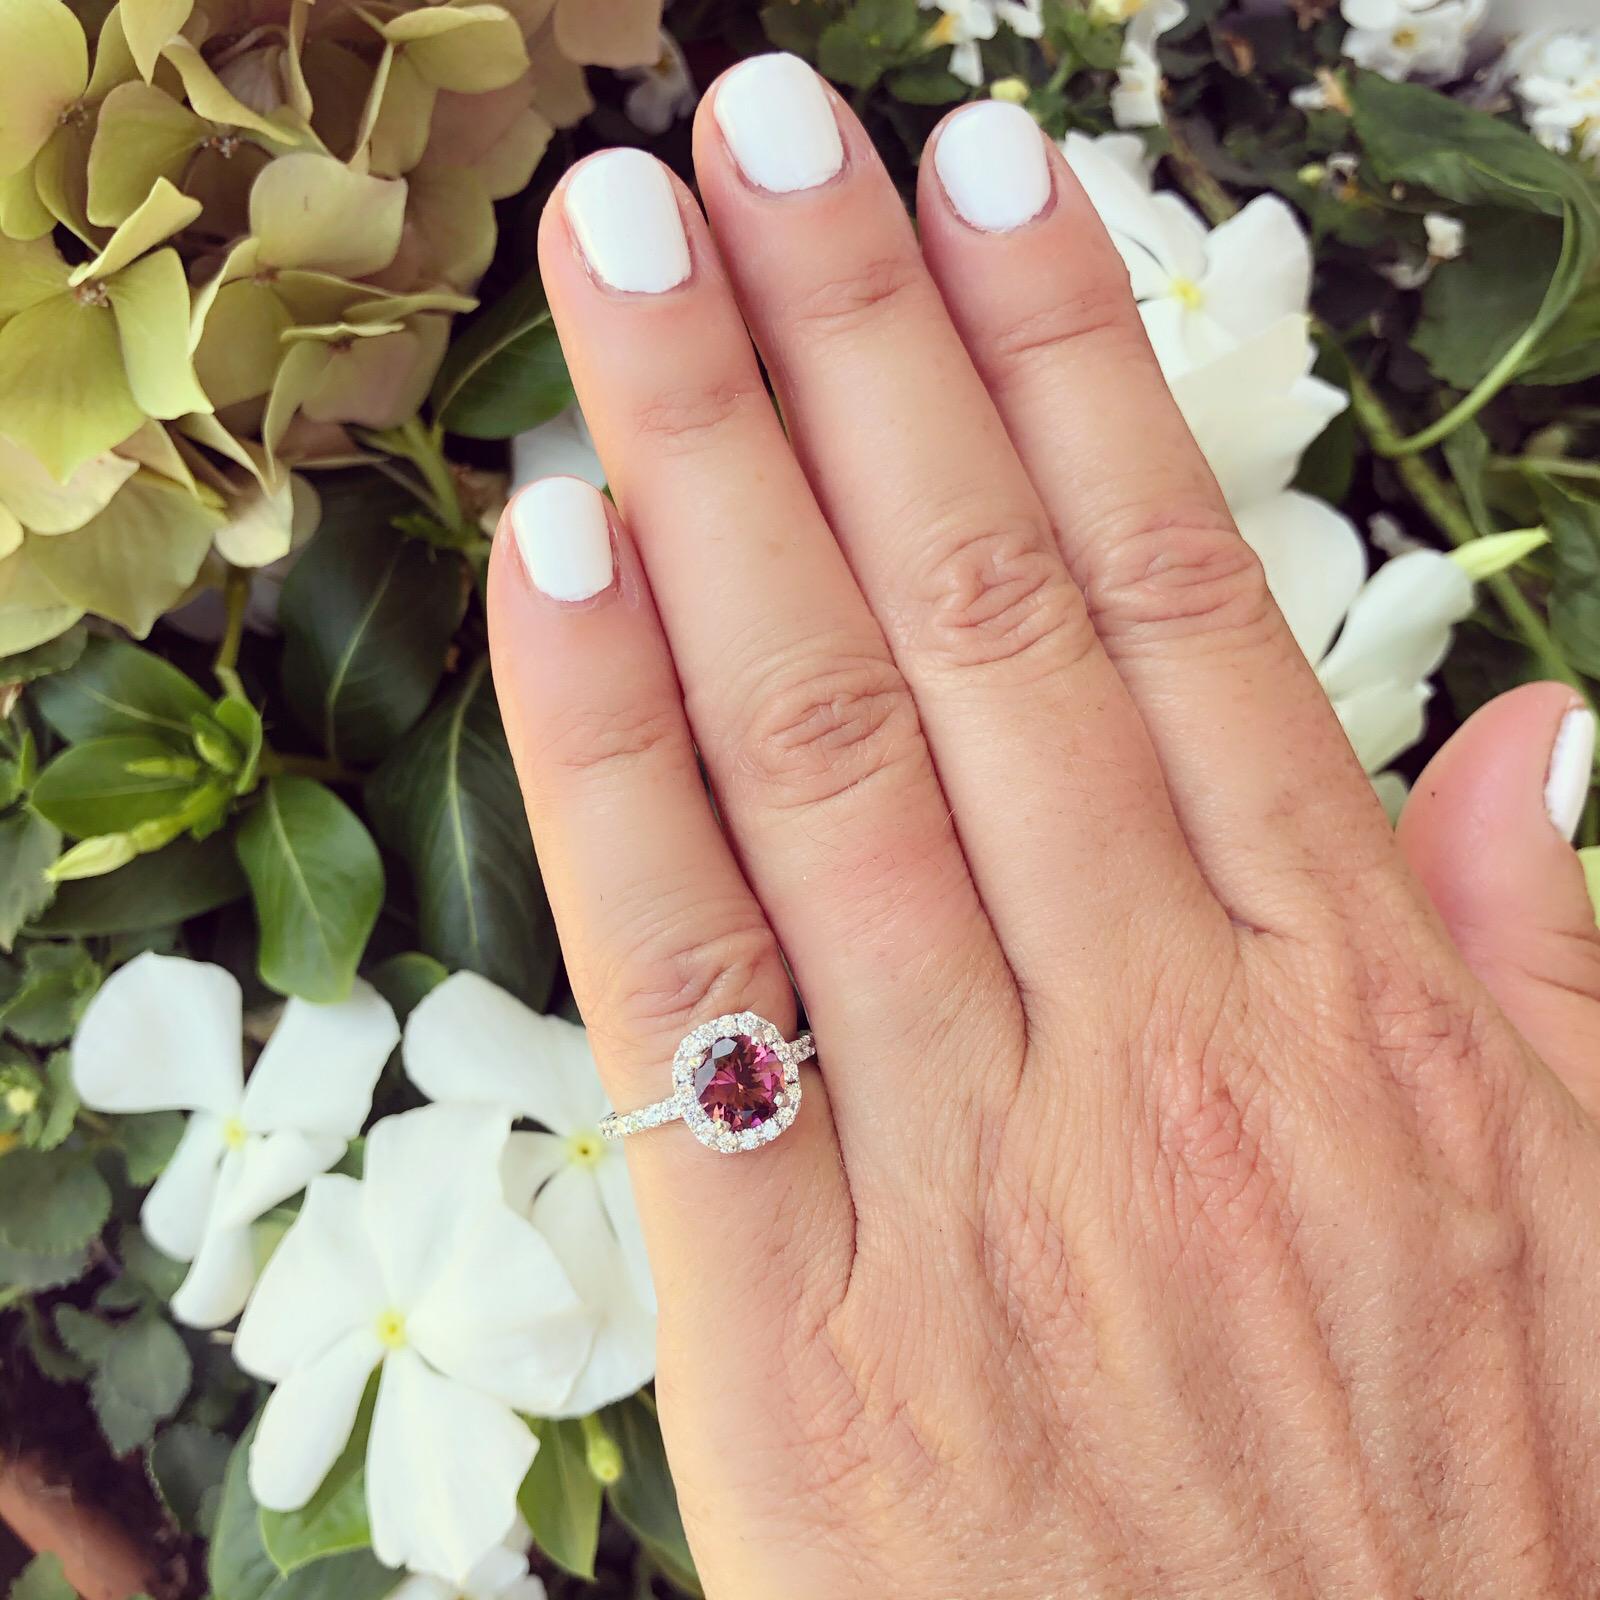 Classic halo design for simple elegance. The 14k white gold ring centers a deeply saturated round pink tourmaline weighing 1.21 carats, prong-set withing a halo of round brilliant-cut diamonds, then completed by a full eternity diamond-set band. In